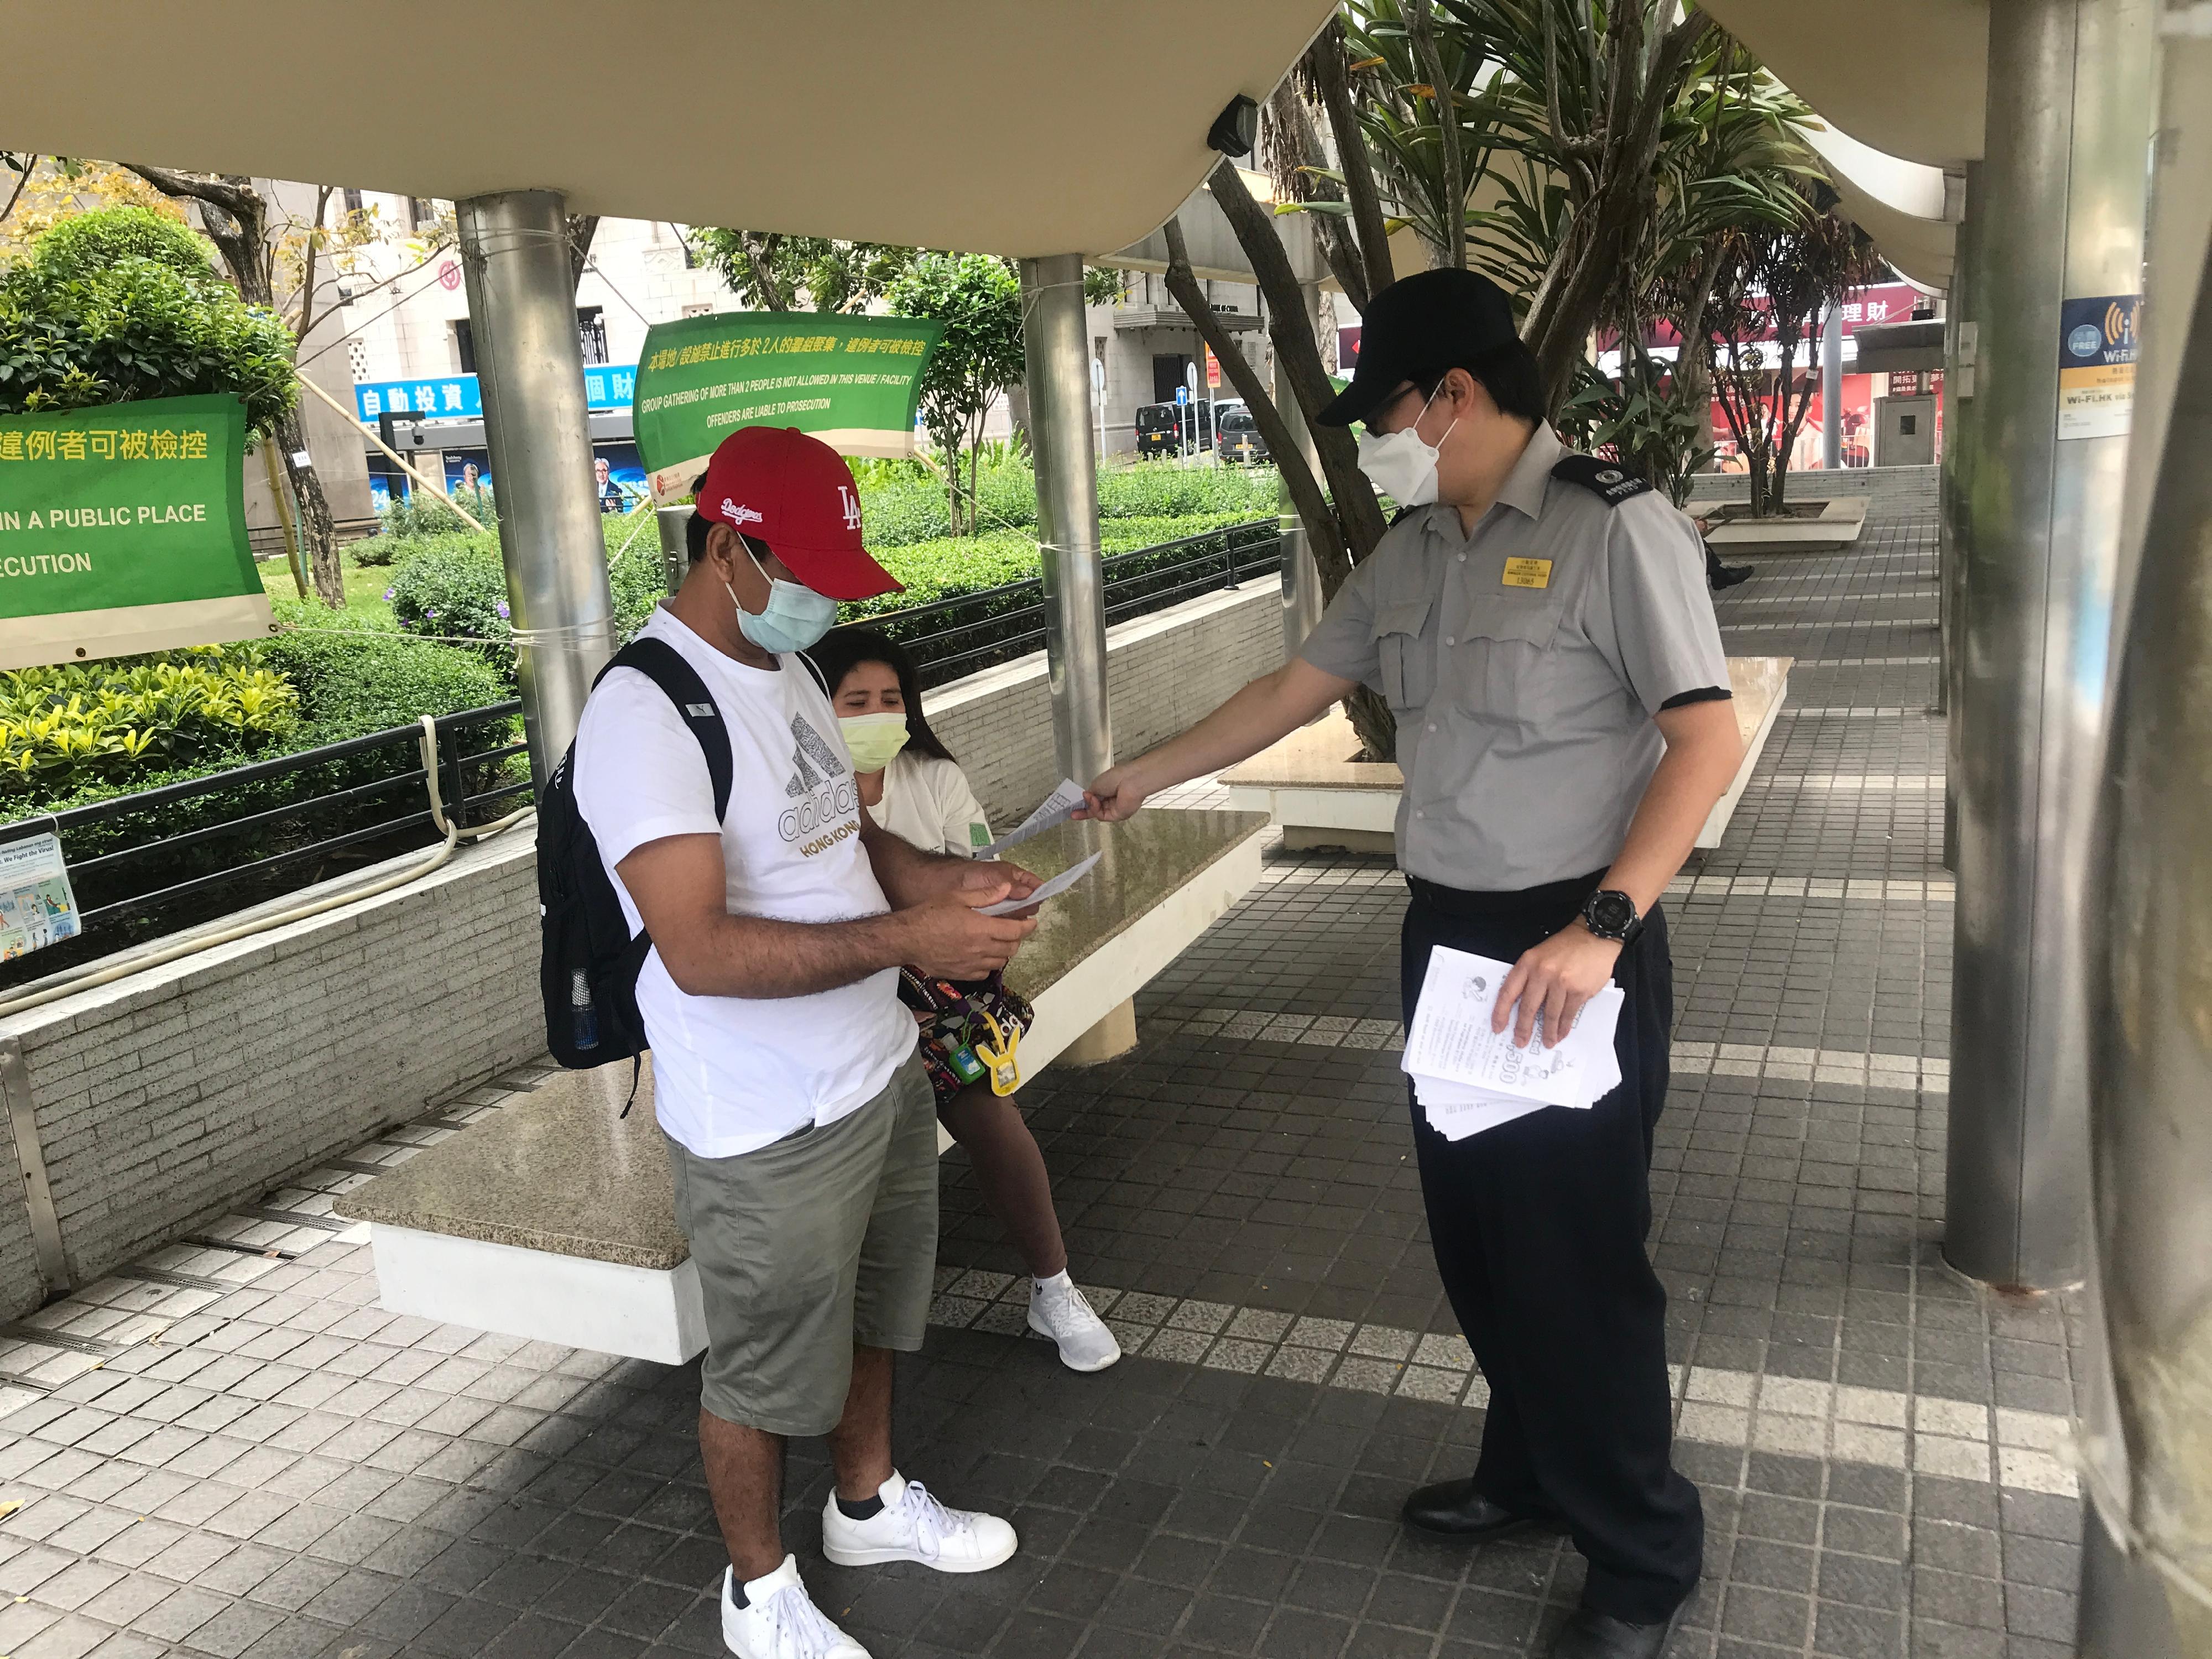 The Food and Environmental Hygiene Department conducted joint operations with several government departments yesterday (April 15) at public places where people including foreign domestic helpers congregate during weekends and public holidays to carry out publicity and educational work, appealing to them to raise awareness of epidemic prevention and comply with the various anti-epidemic regulations and restrictions.